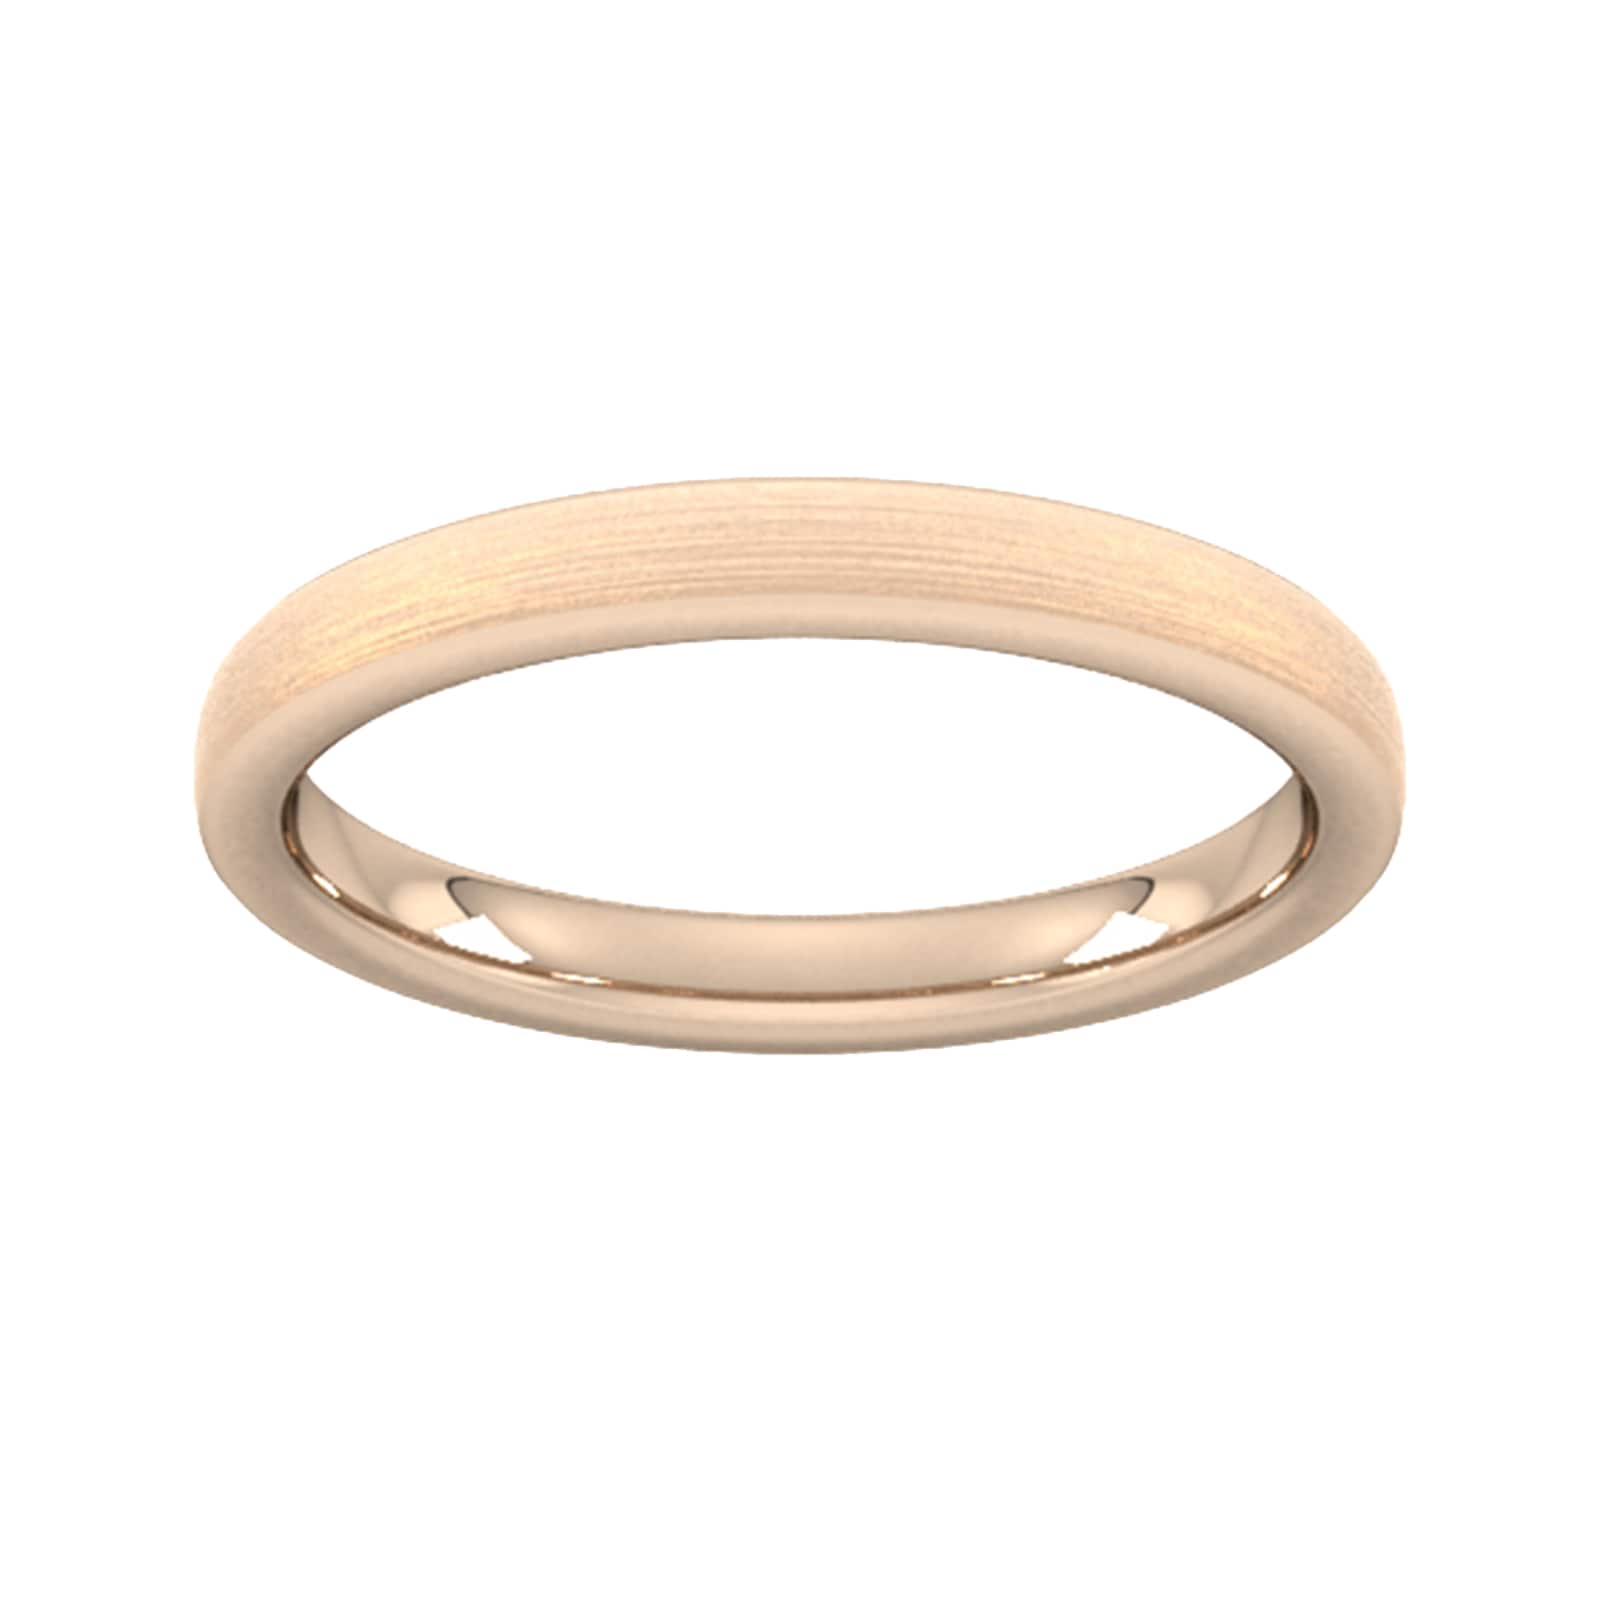 2.5mm Traditional Court Standard Polished Chamfered Edges With Matt Centre Wedding Ring In 18 Carat Rose Gold - Ring Size O